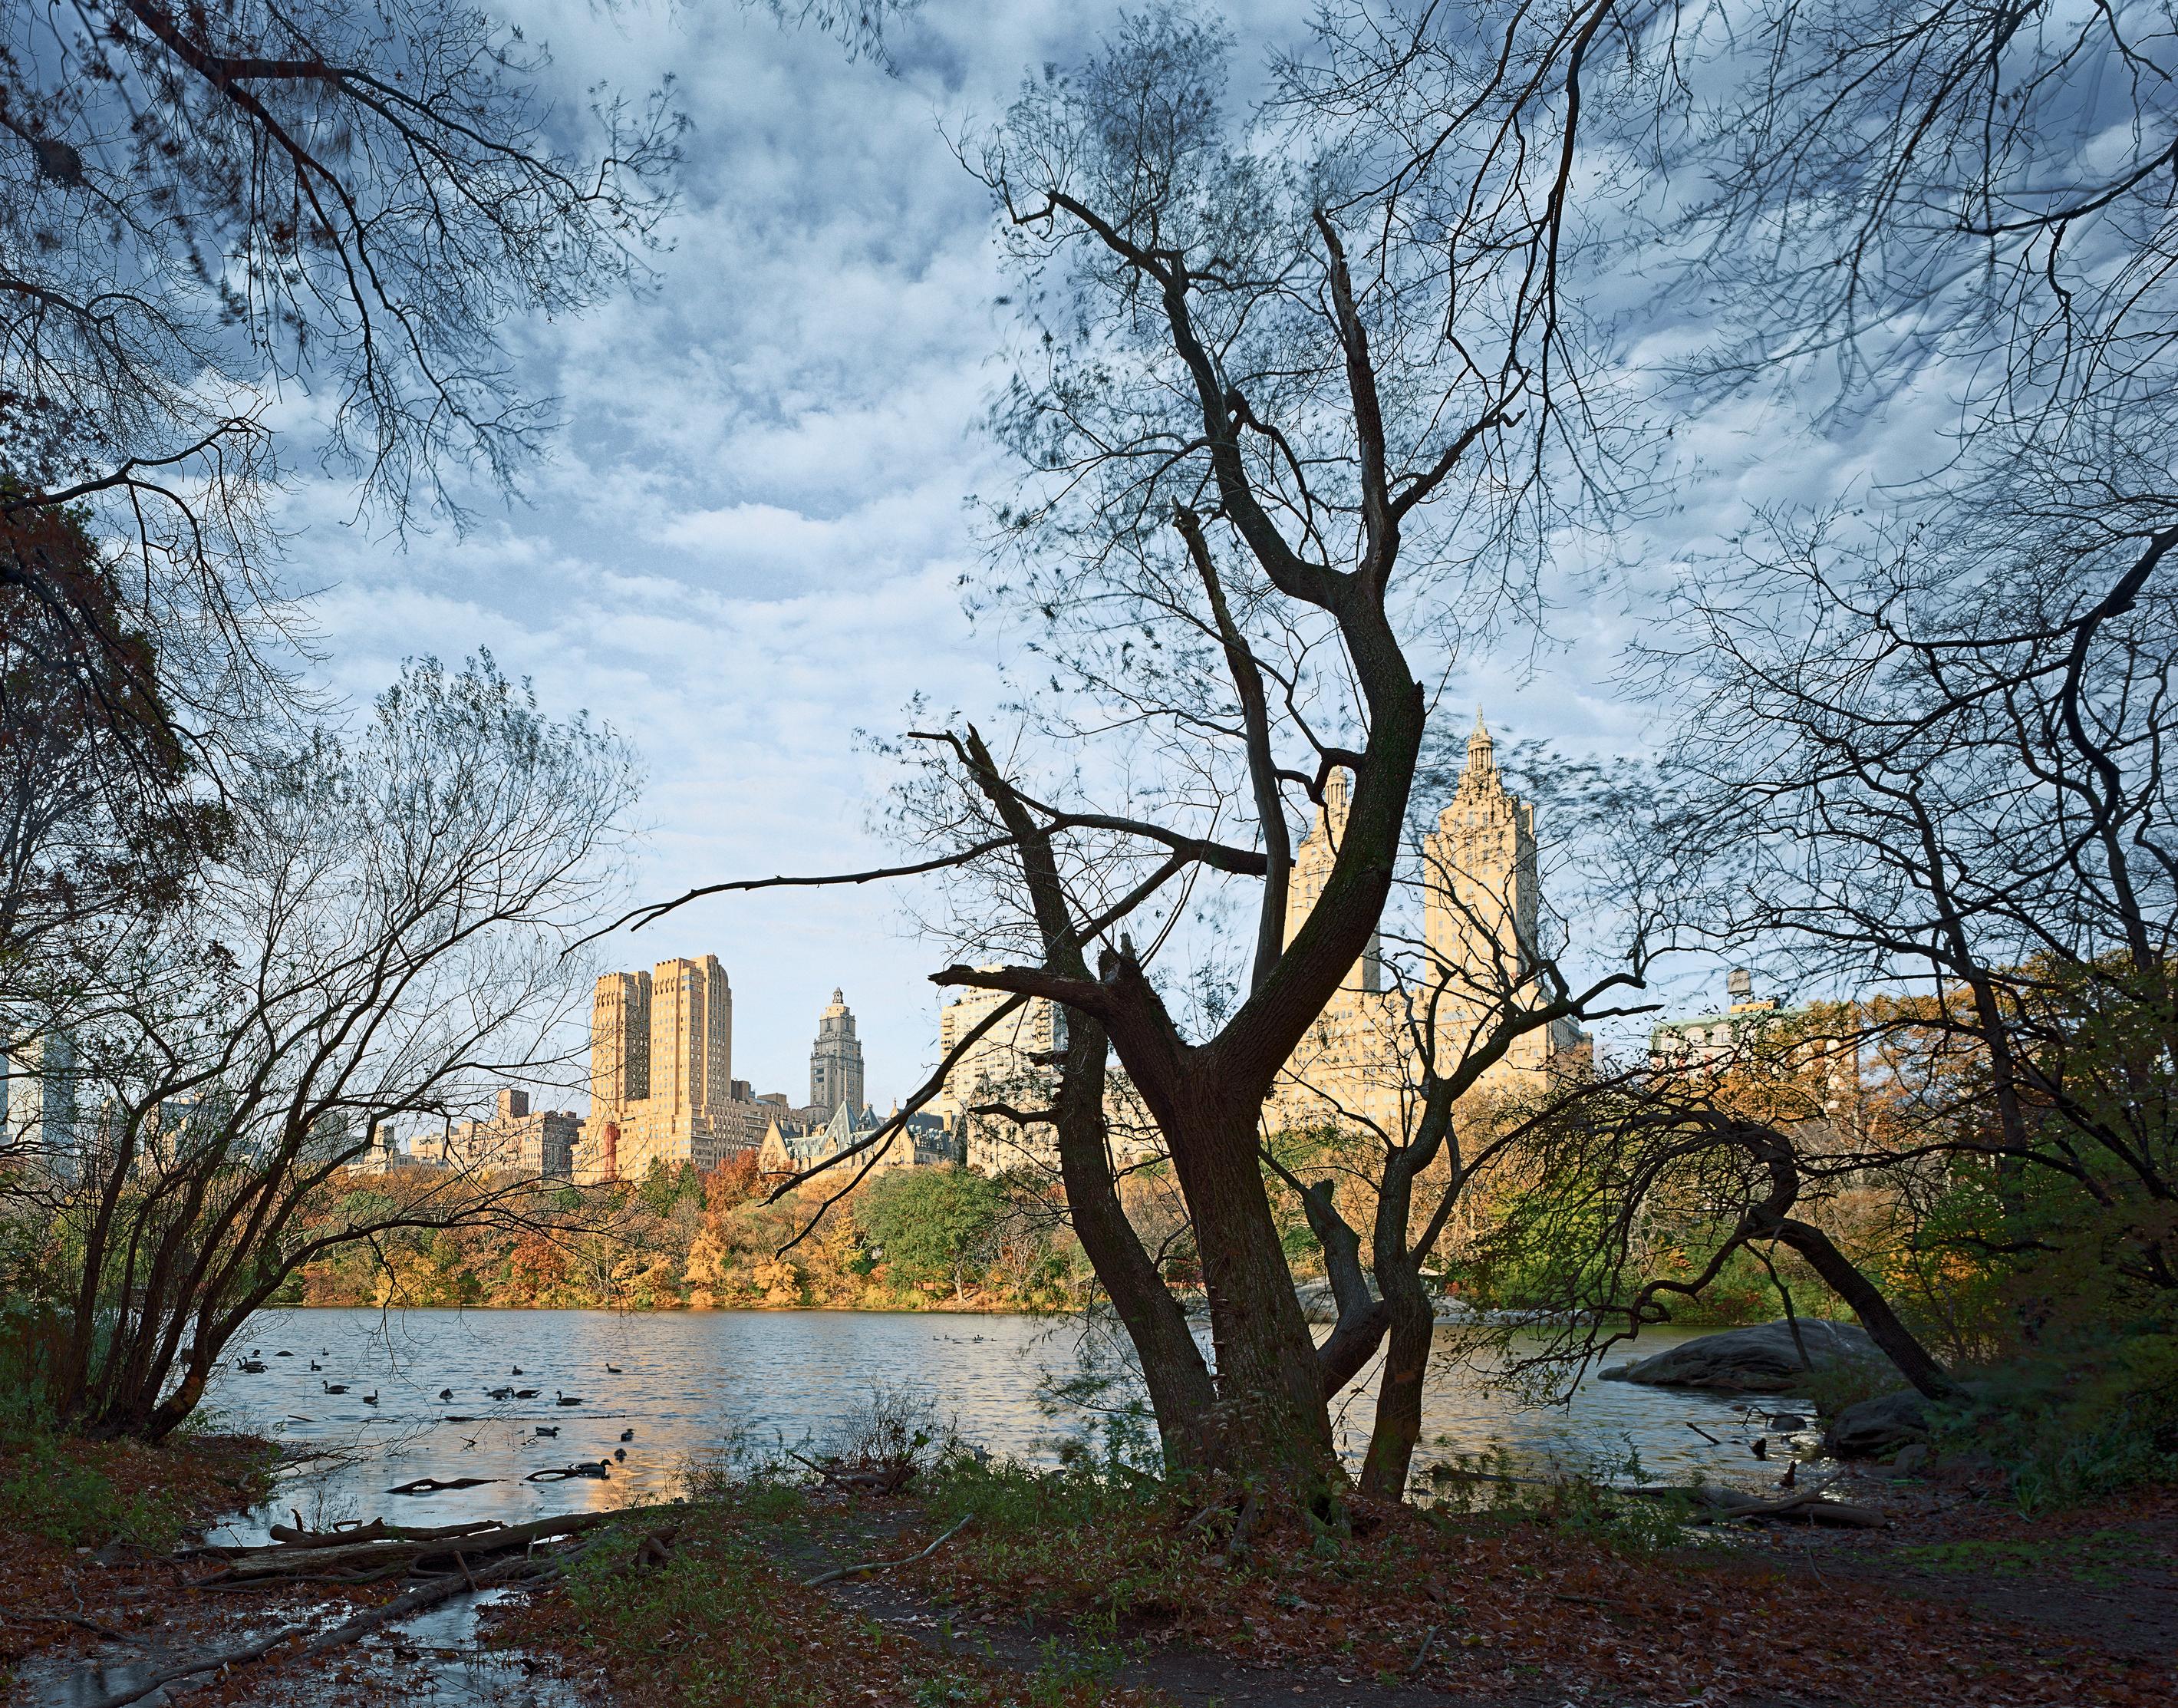 Archival Pigment Print

Central Park

All available sizes & editions for each size of this photograph:
30" x 40” - Edition of 5 + 2 Artist Proofs
40" X 50"- Edition of 5 + 2 Artist Proofs
50" X 60"-  Edition of 5 + 2 Artist Proofs

This photograph